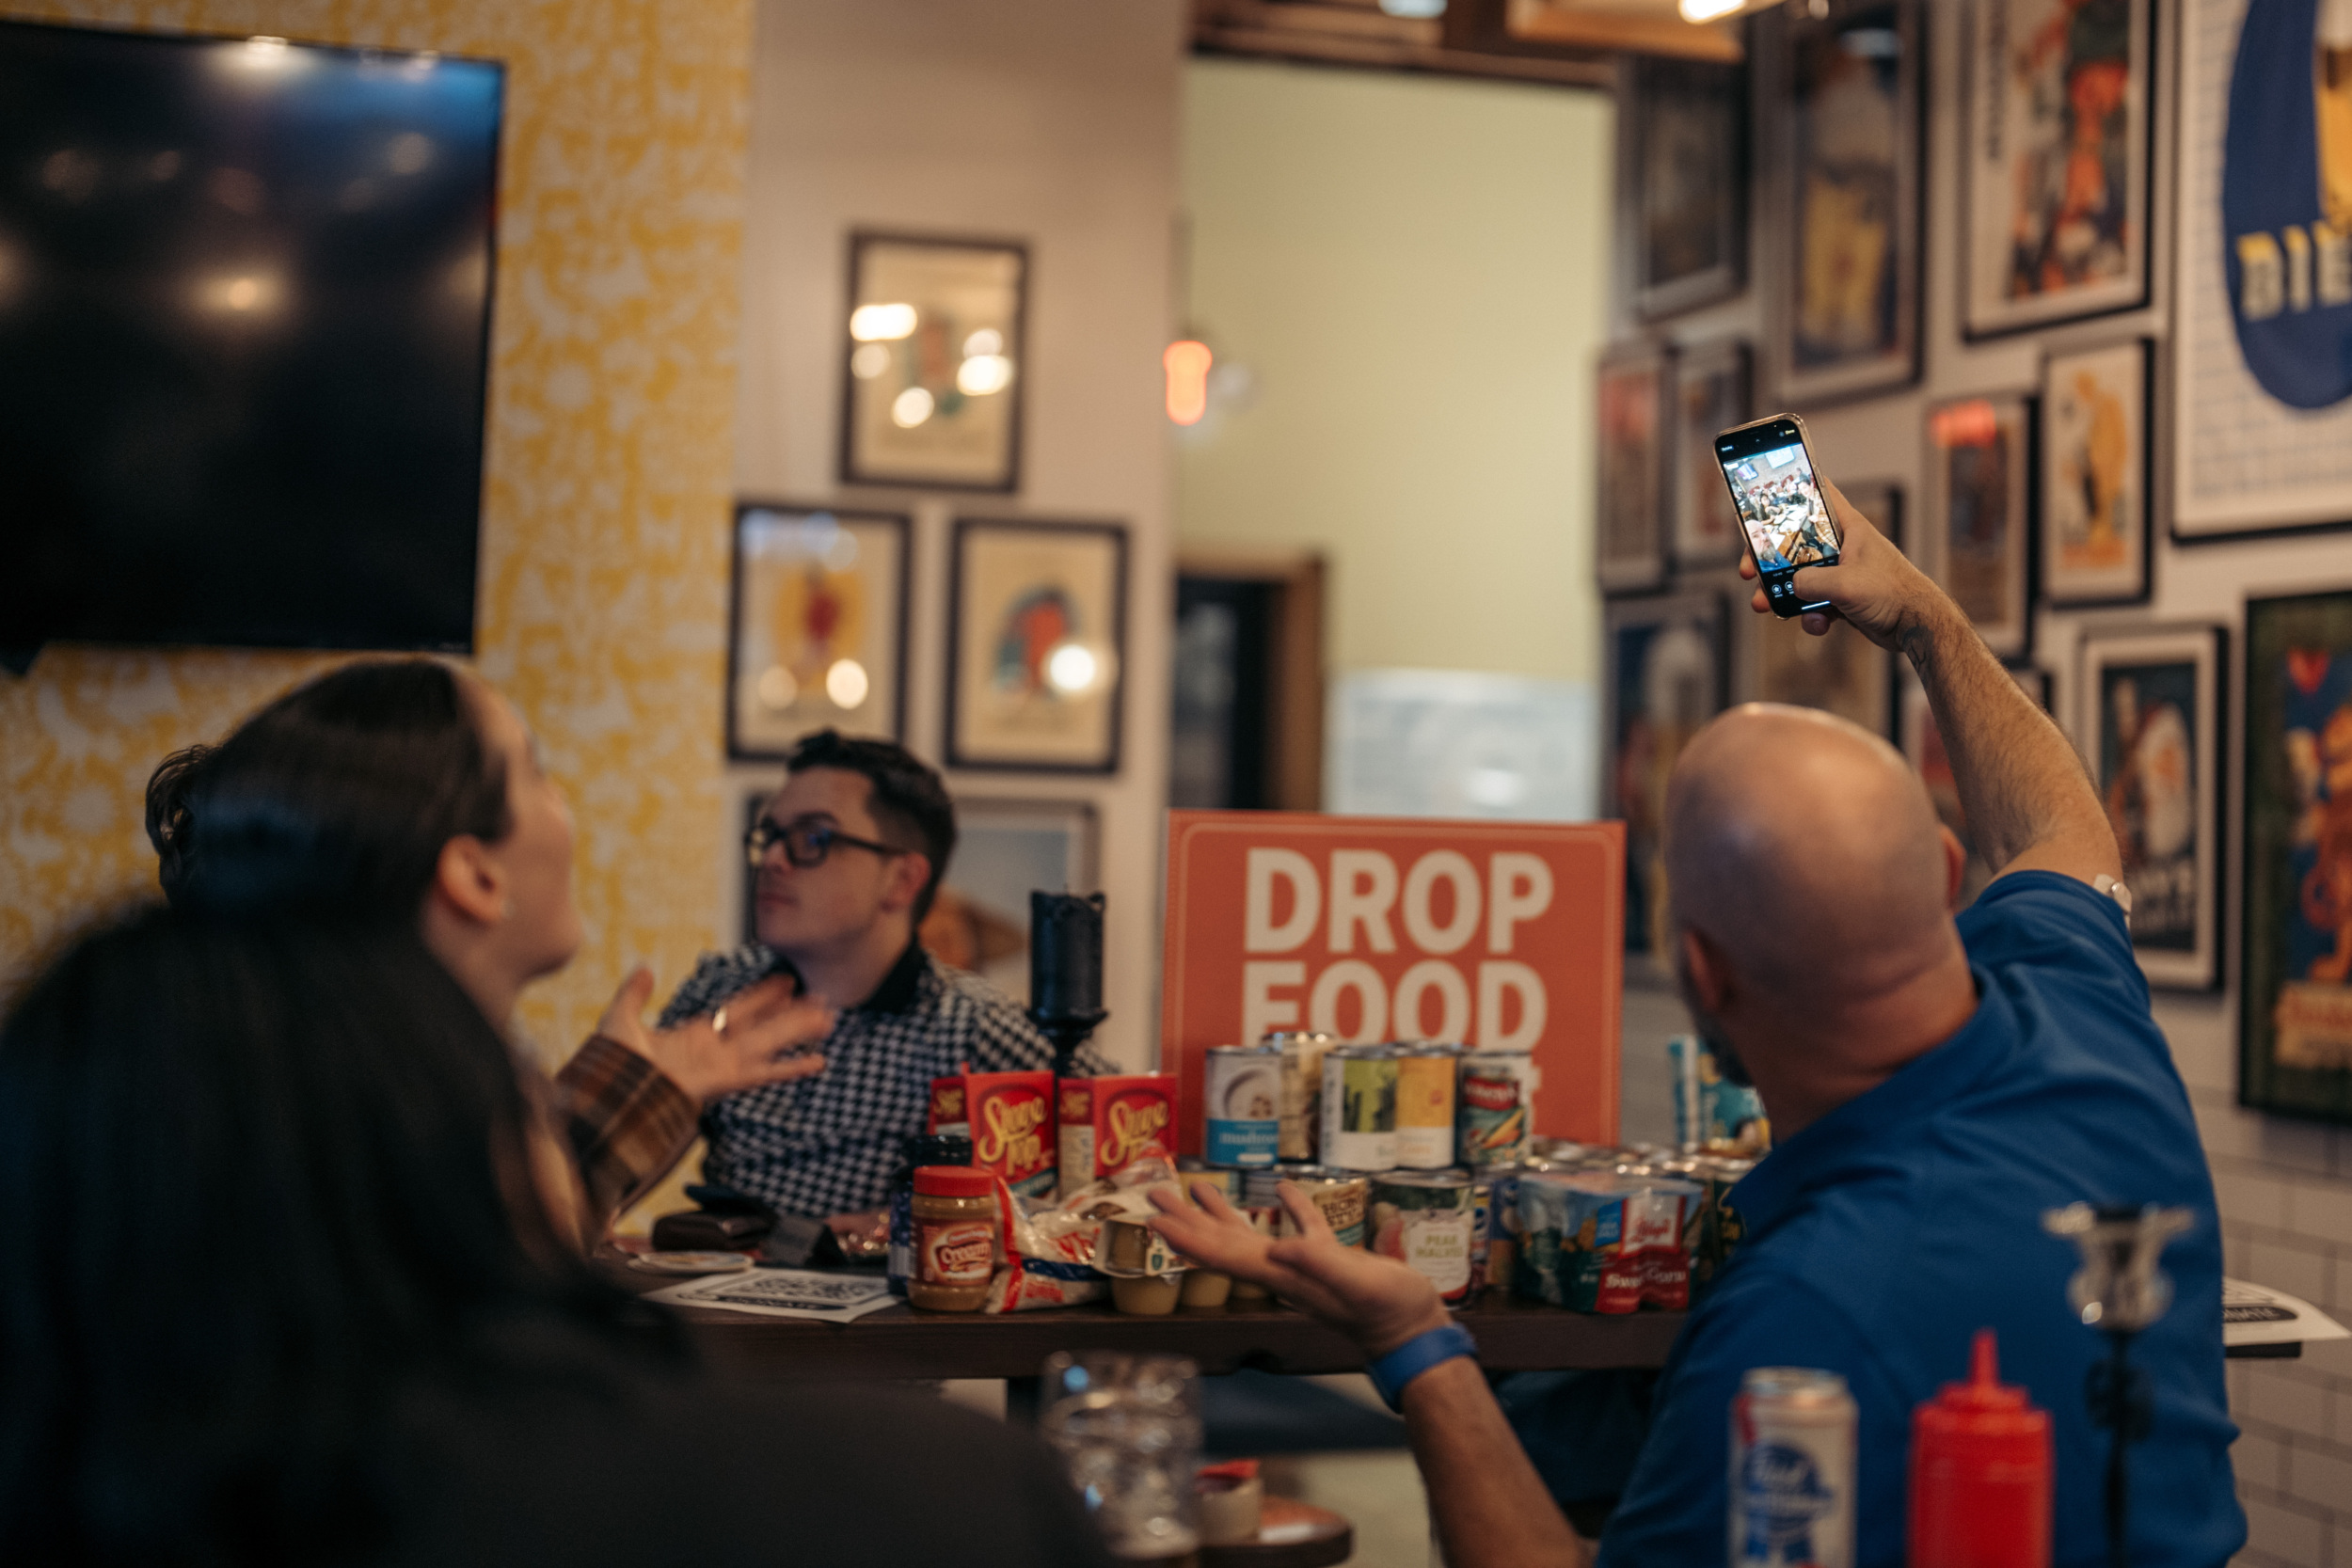 A man takes a selfie inside a restaurant. Food for donation are pictured in the background.